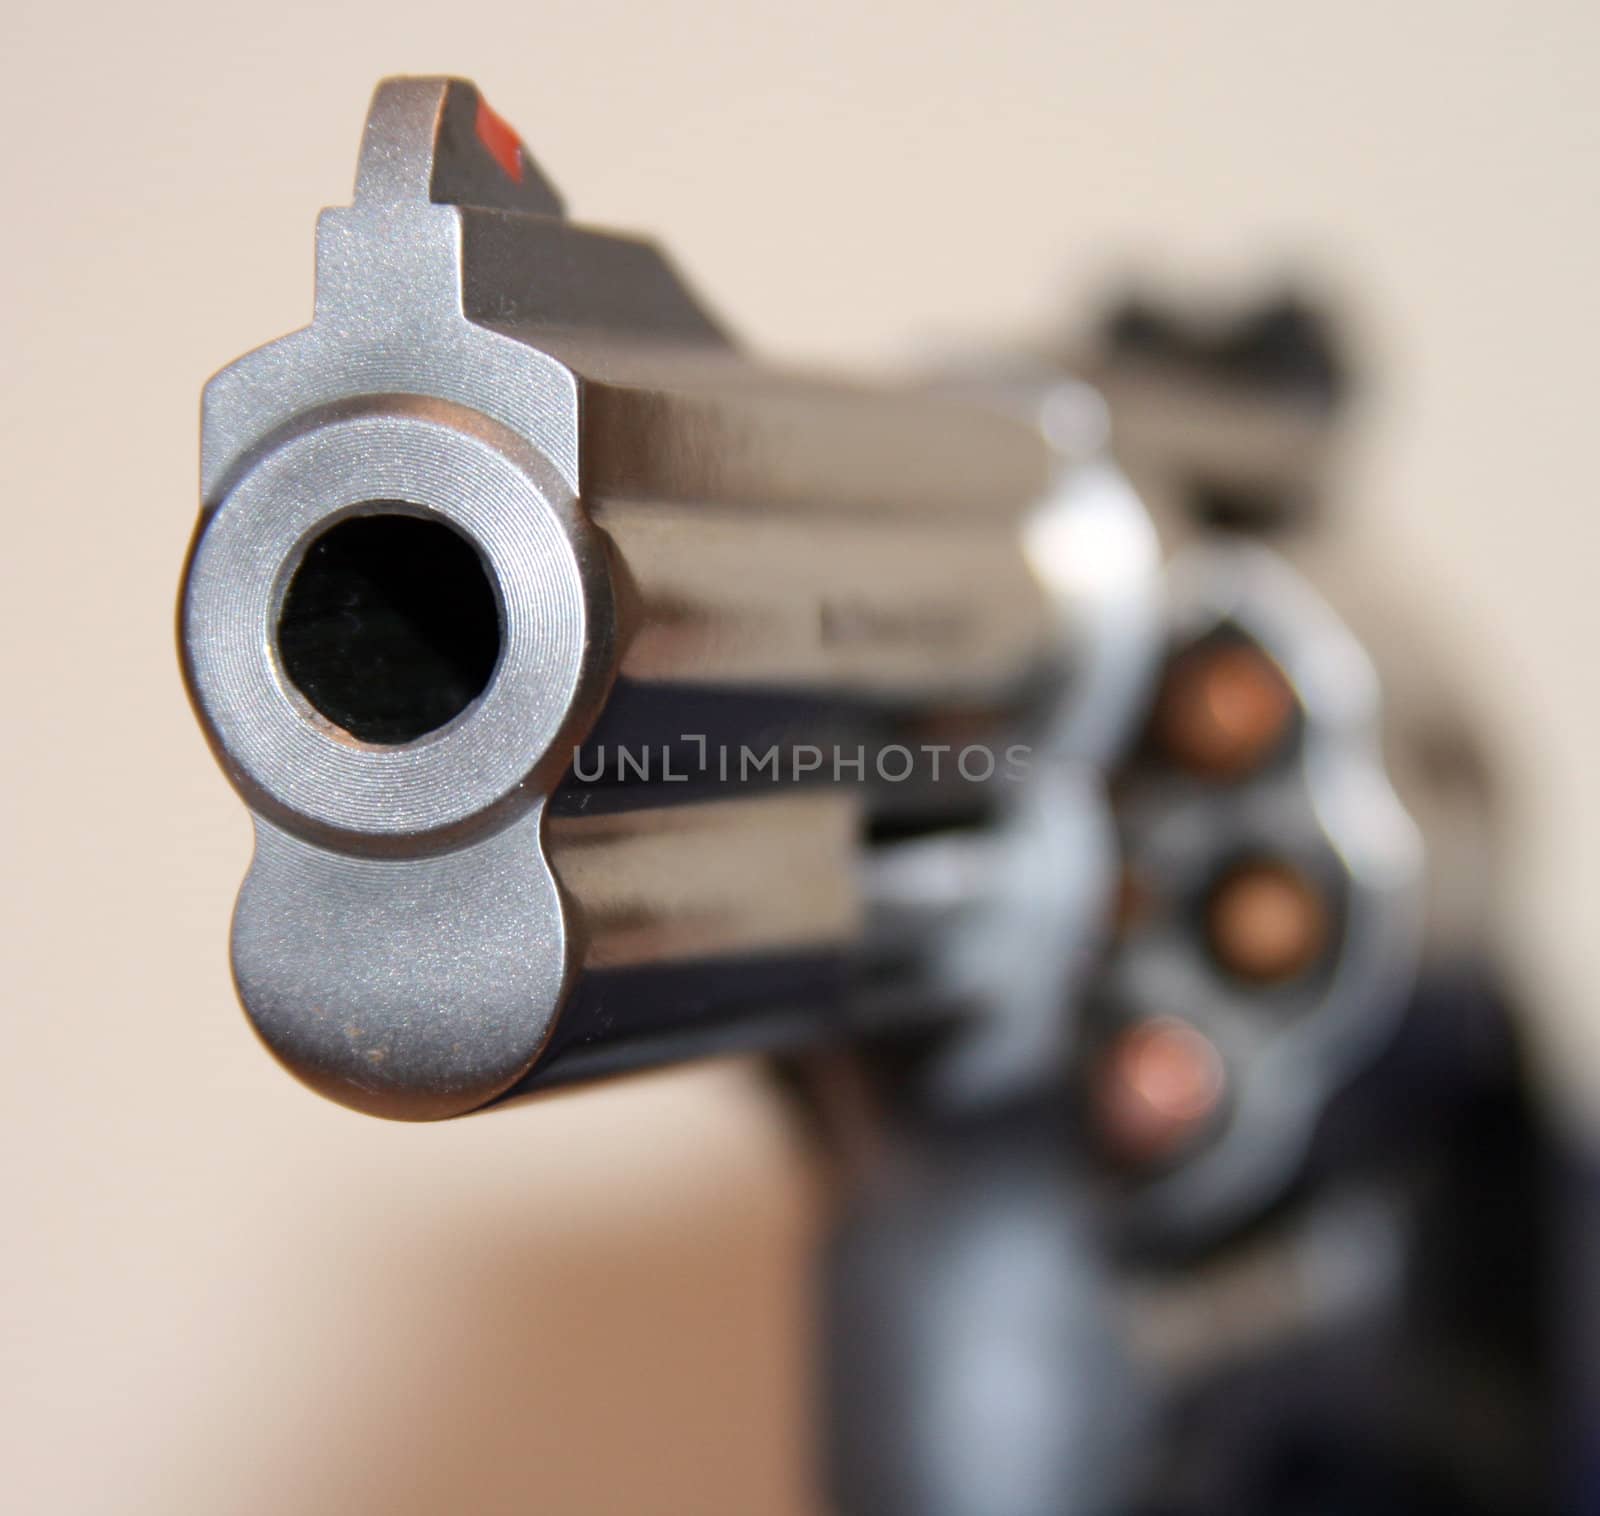 Threatening look down a Smith & Wesson .357 gun barrel. Gun is fully loaded with 7 rounds.